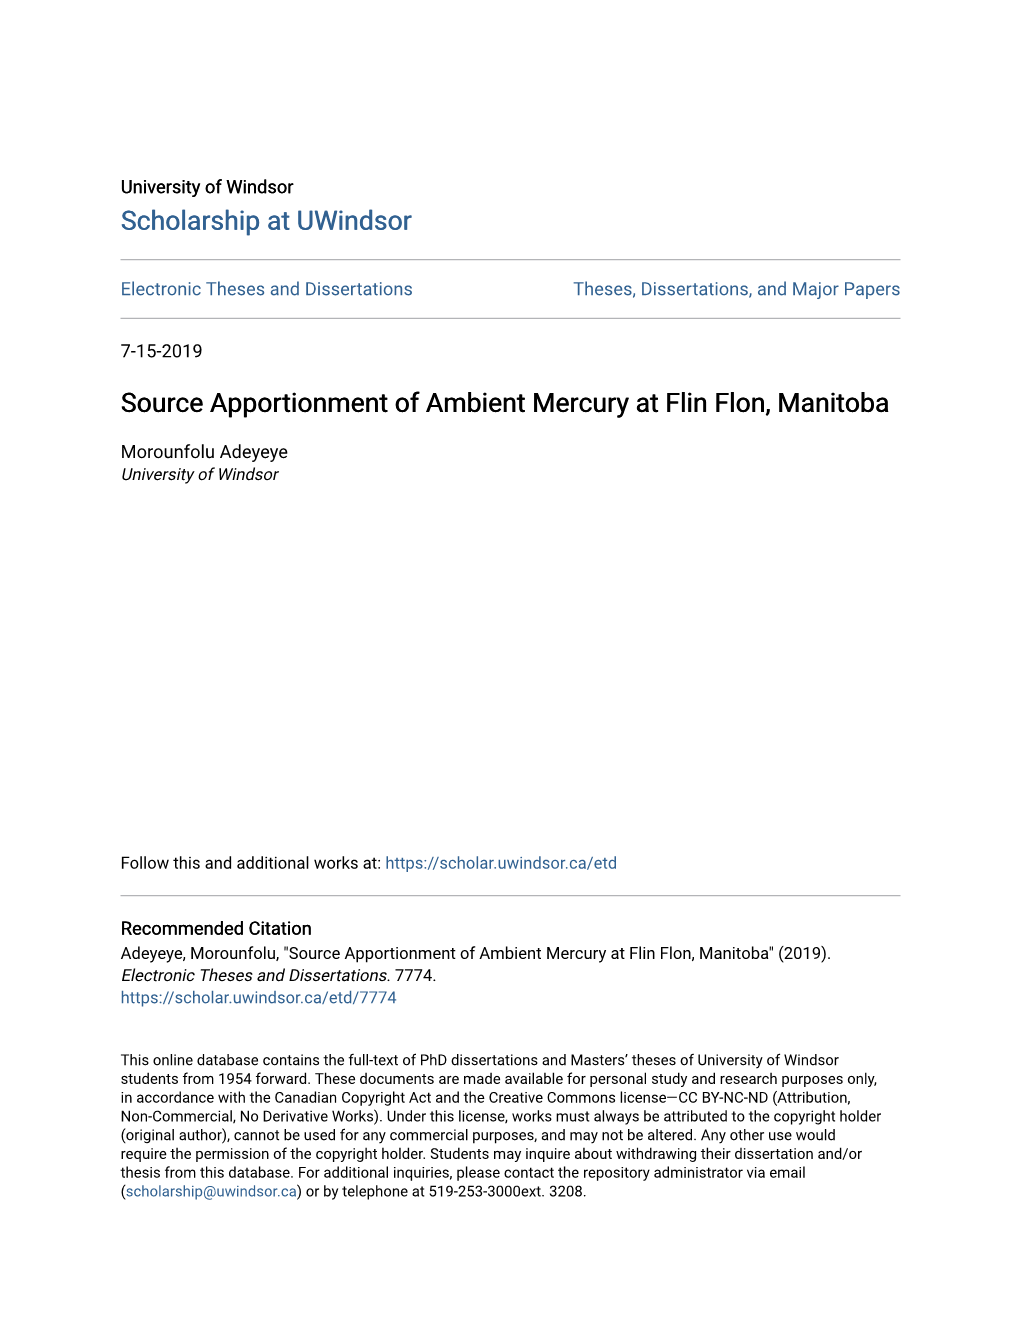 Source Apportionment of Ambient Mercury at Flin Flon, Manitoba